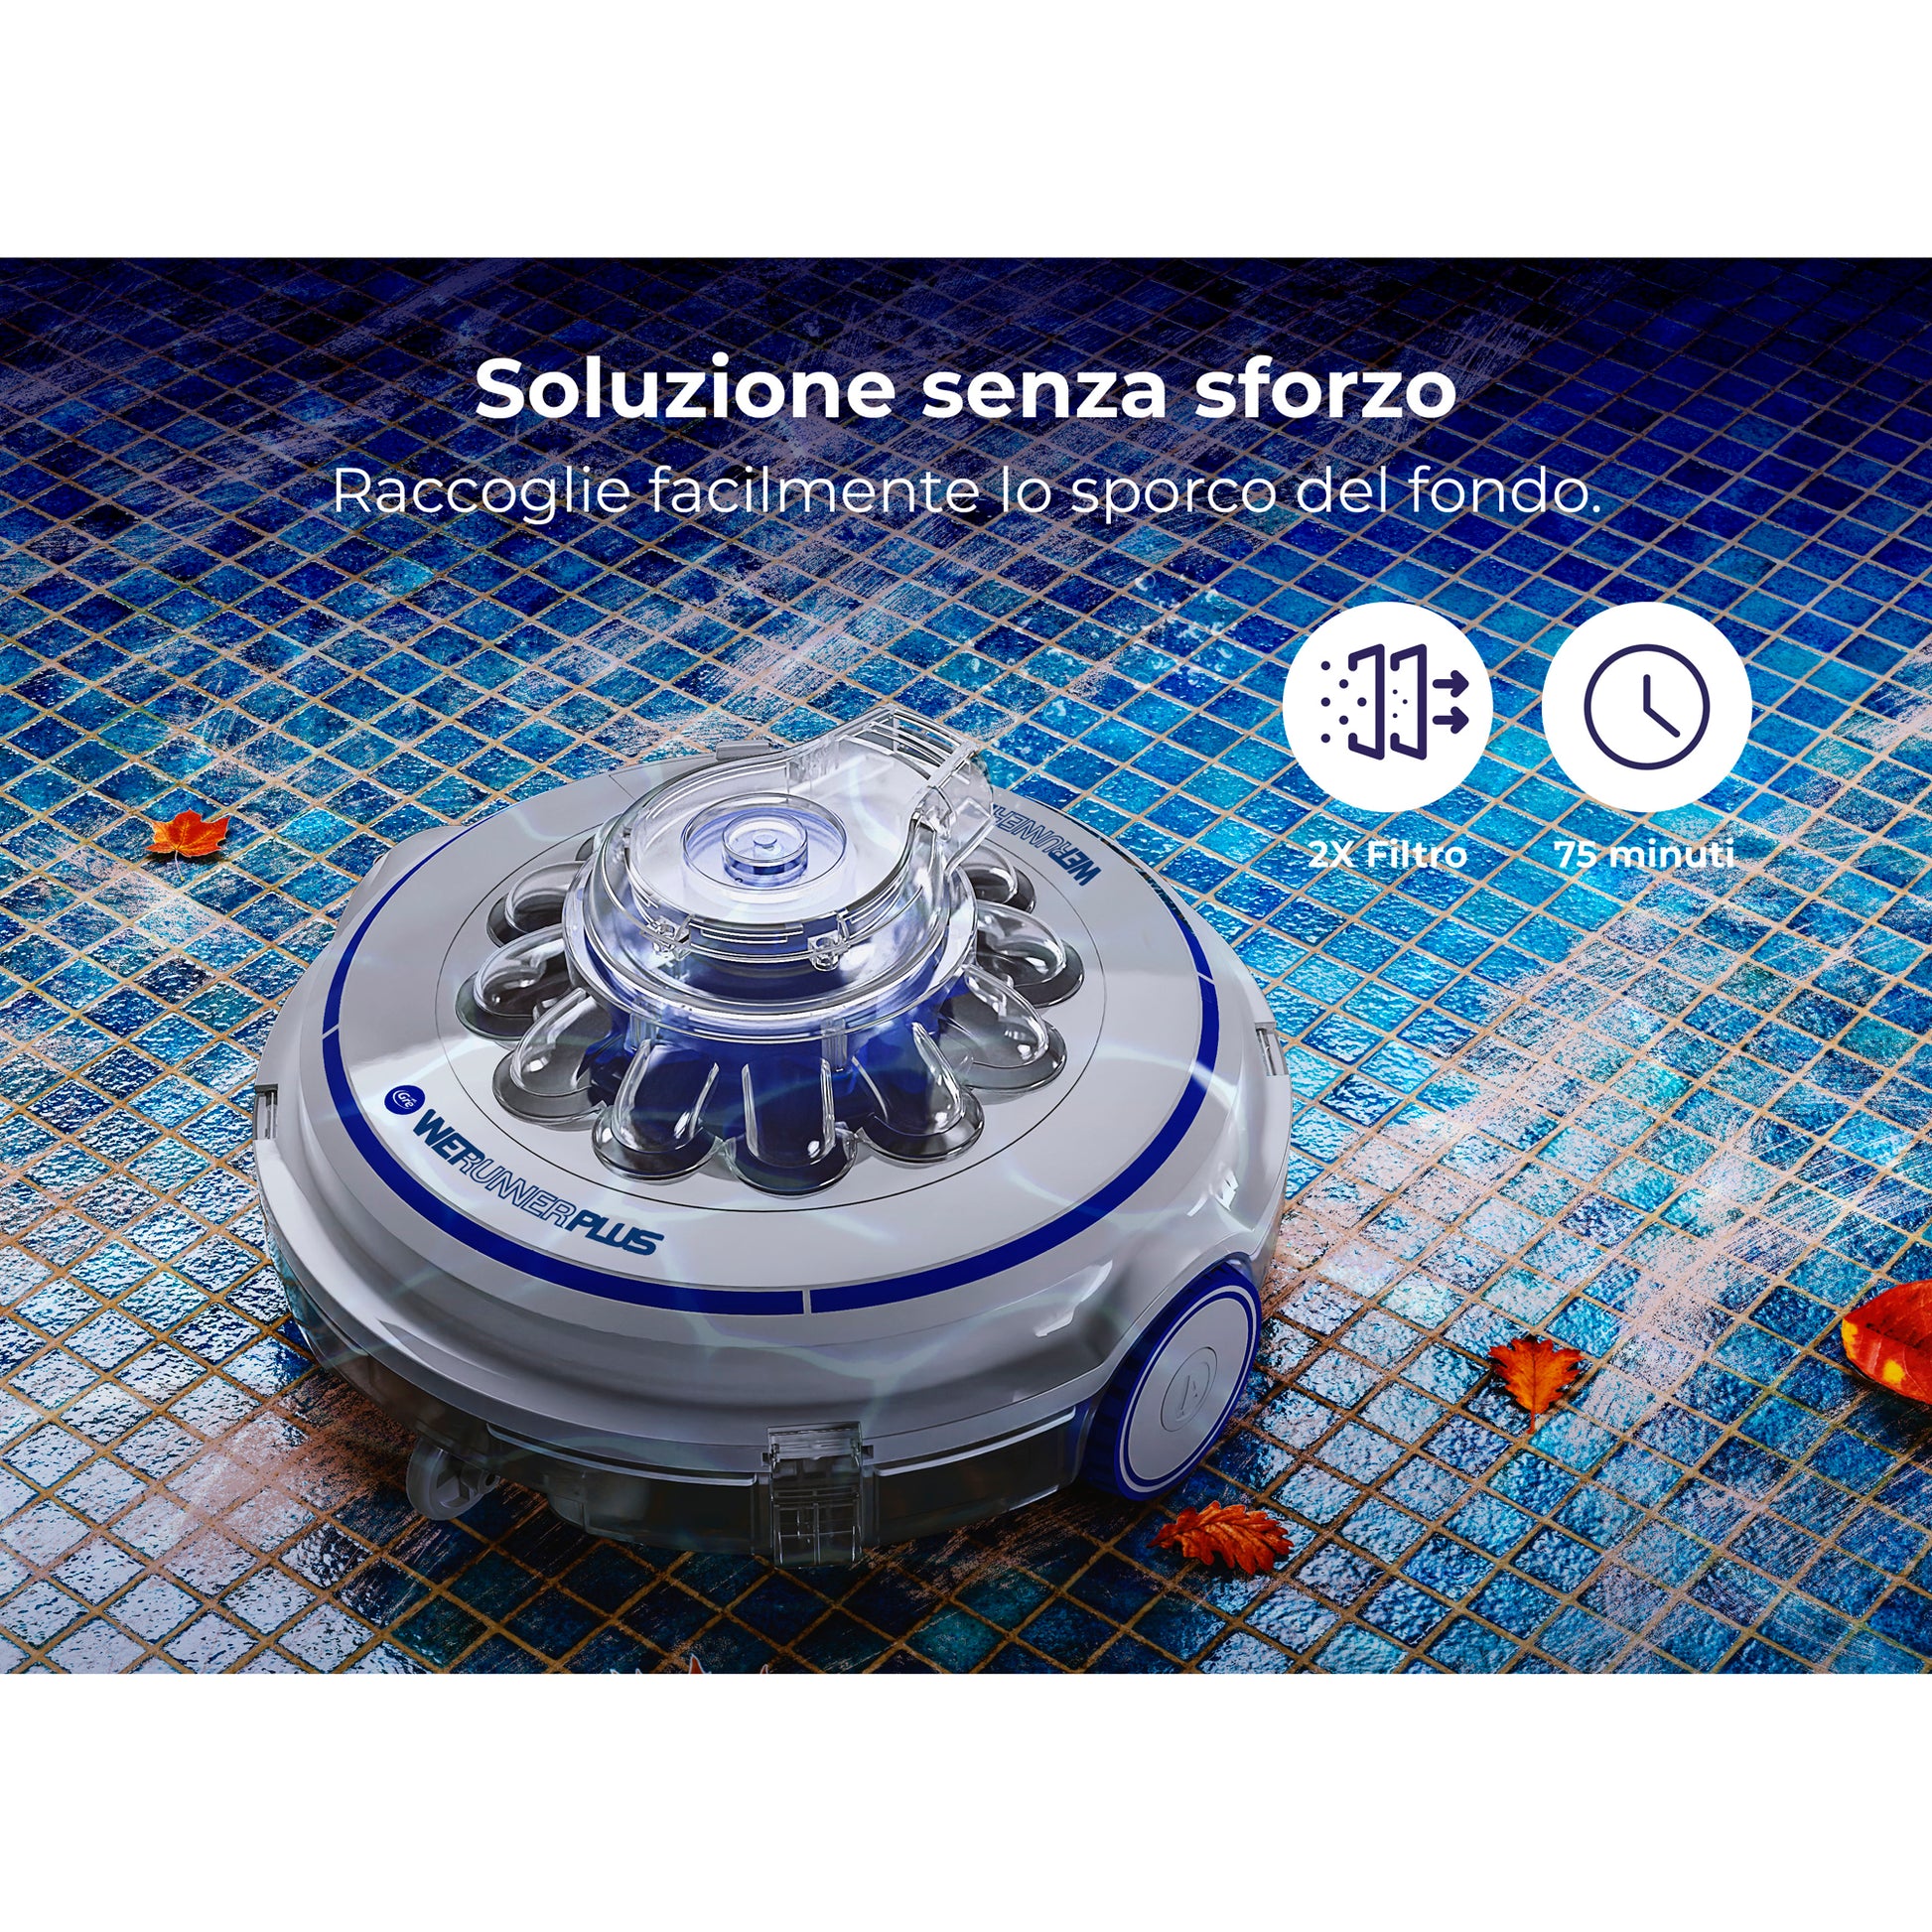 RBR75 BATTERY ROBOT FOR POOLS UP TO 10x5 m